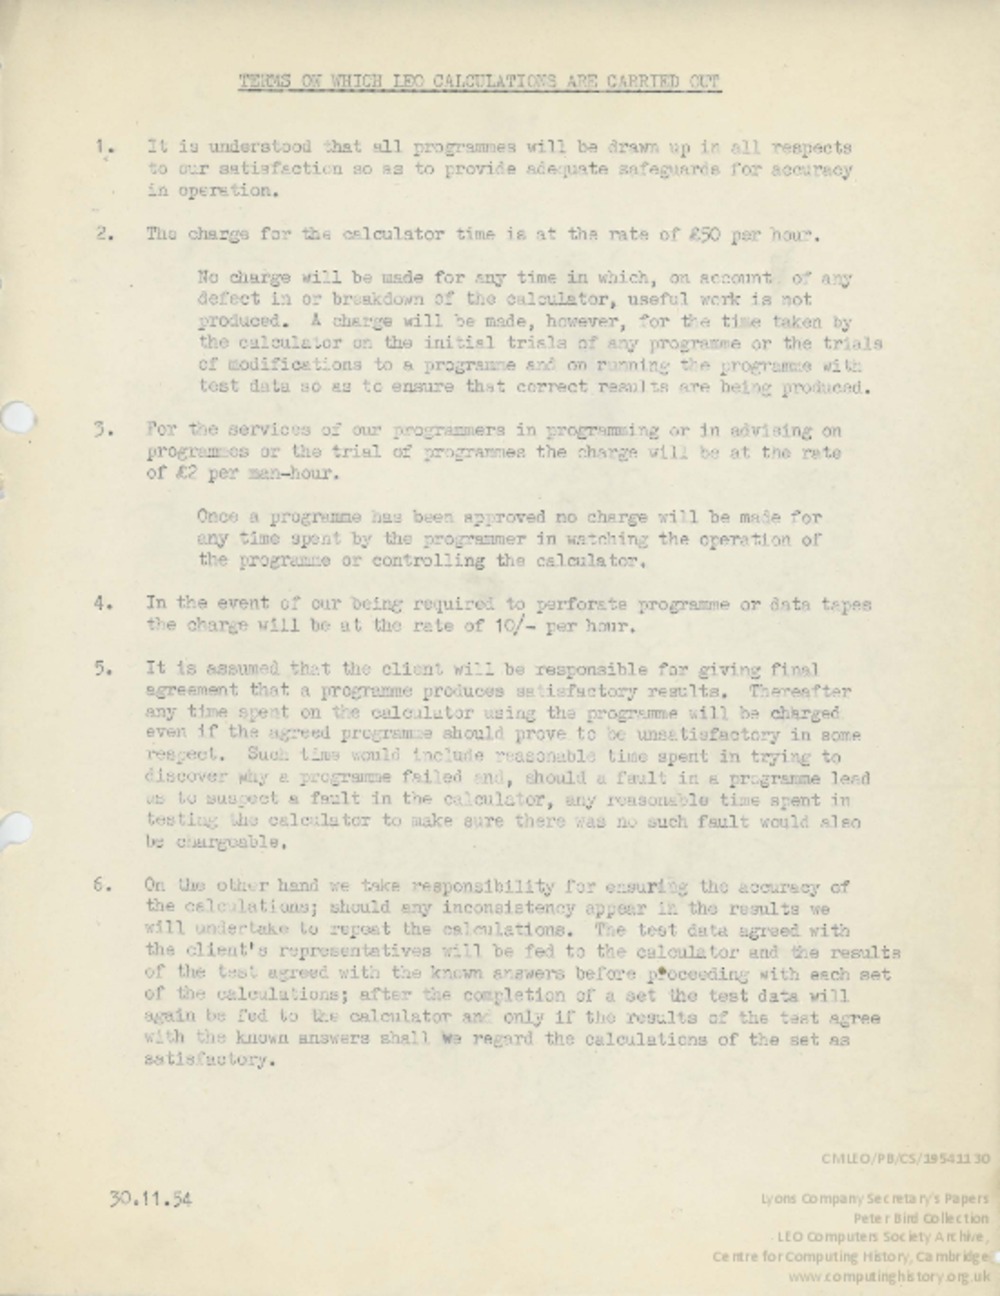 Article: 62310 Terms on which LEO Calculations are Carried Out, 30 Nov 1954